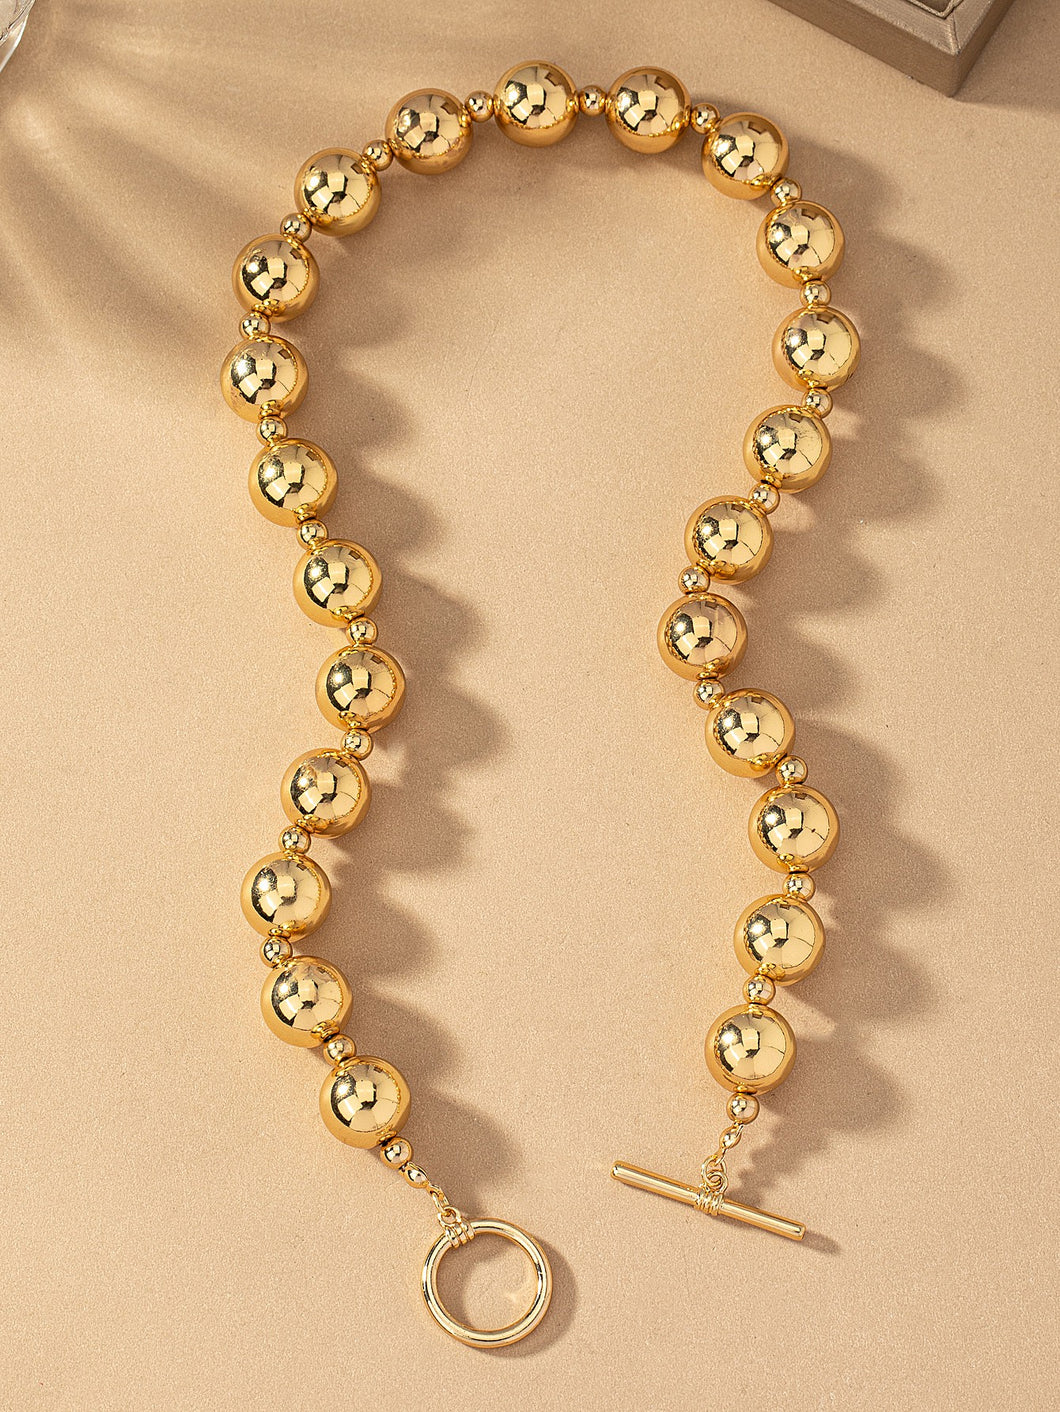 Golden ball and chain necklace